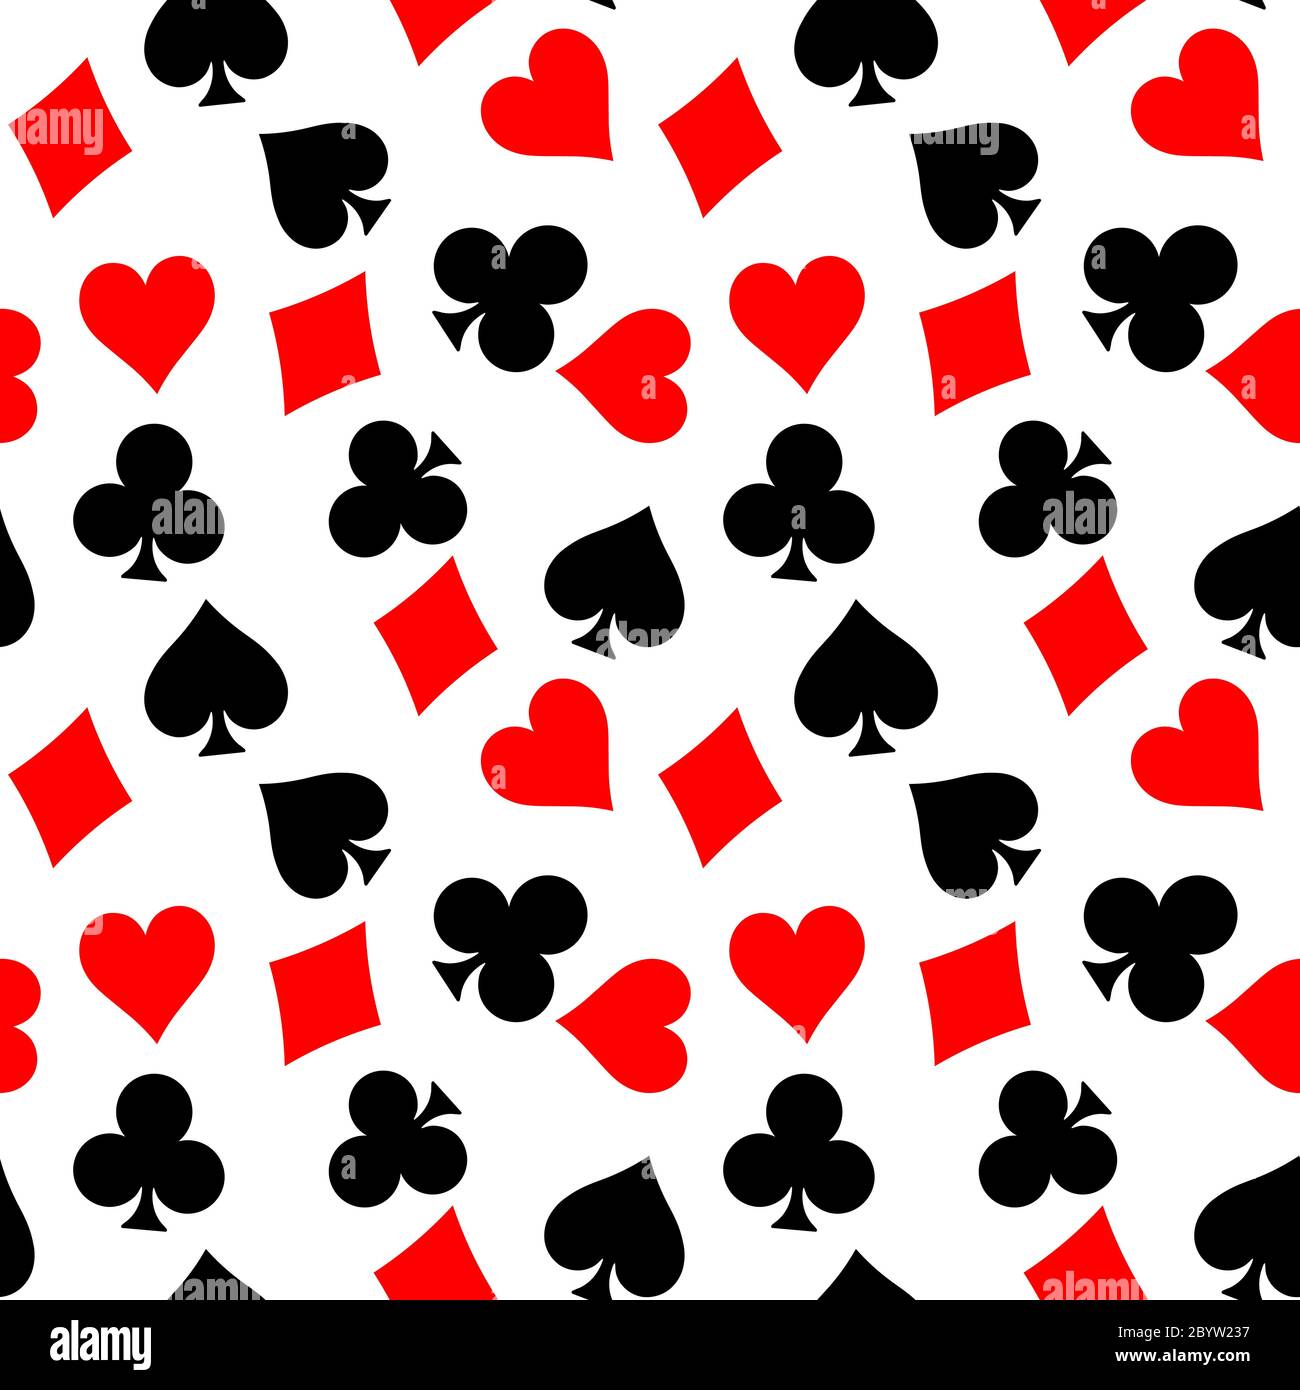 Seamless pattern background of poker suits - hearts, clubs, spades and ...